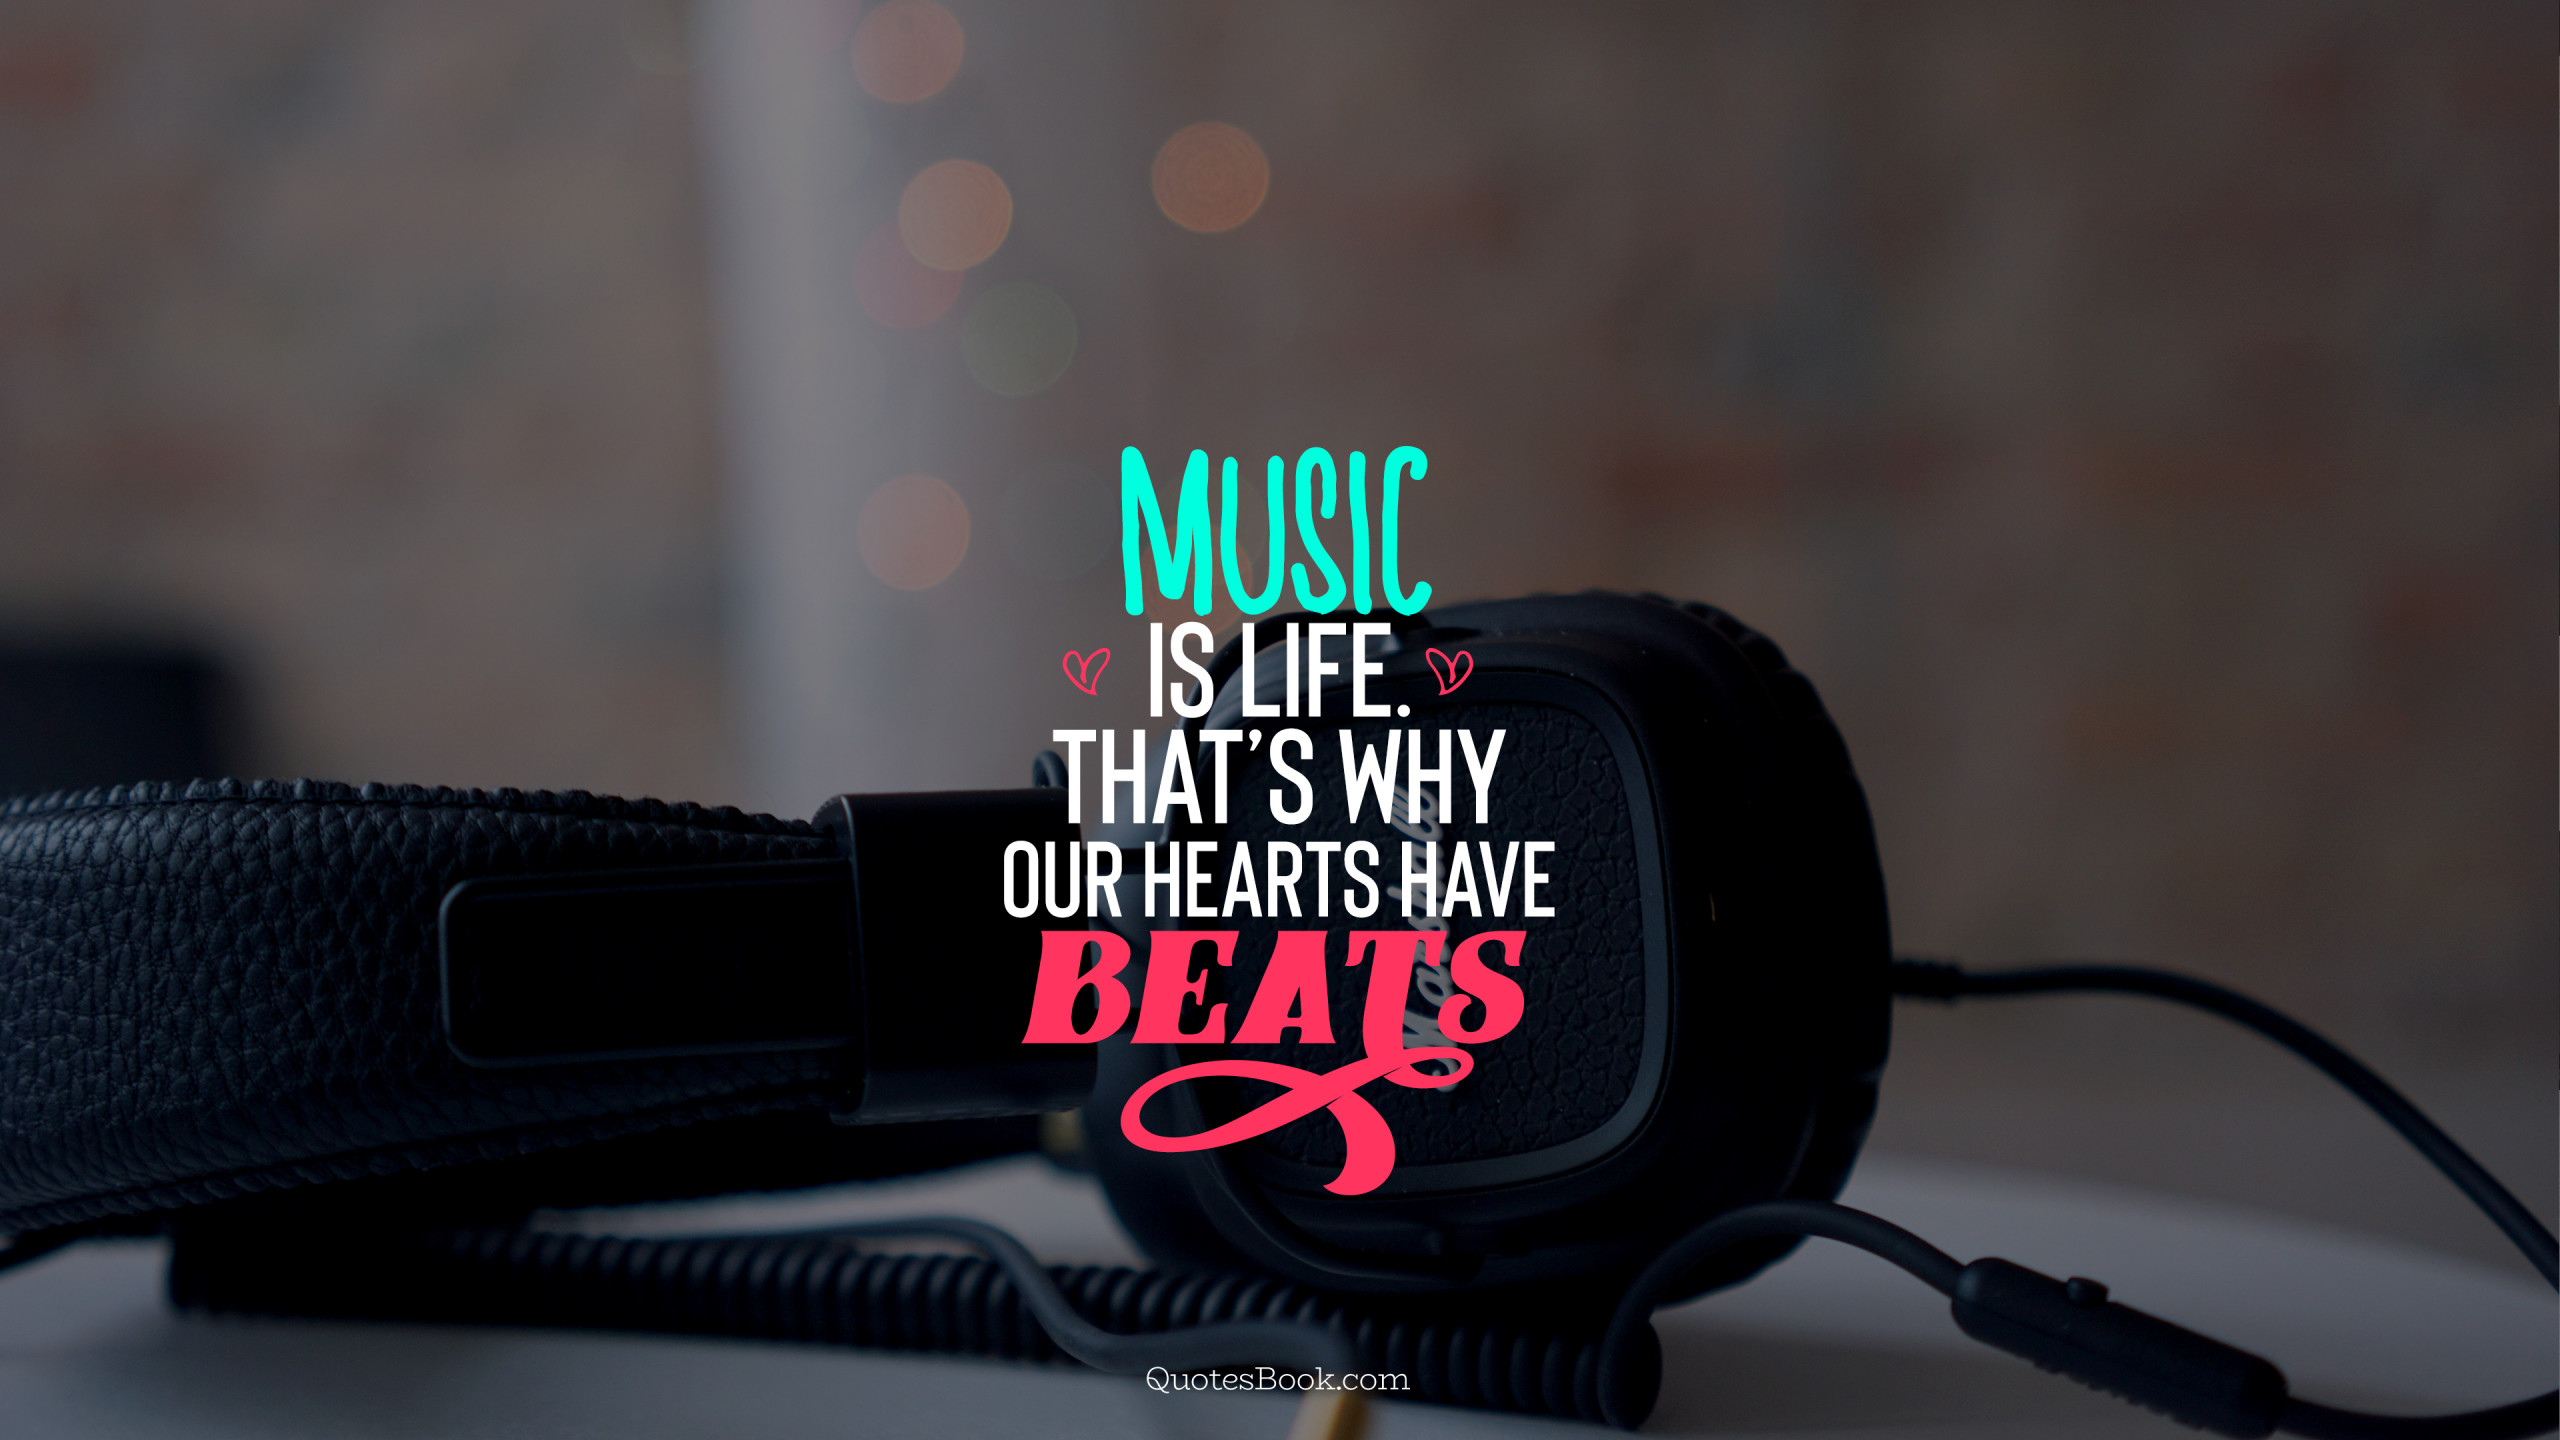 Music is life. That's why our hearts have beats - QuotesBook